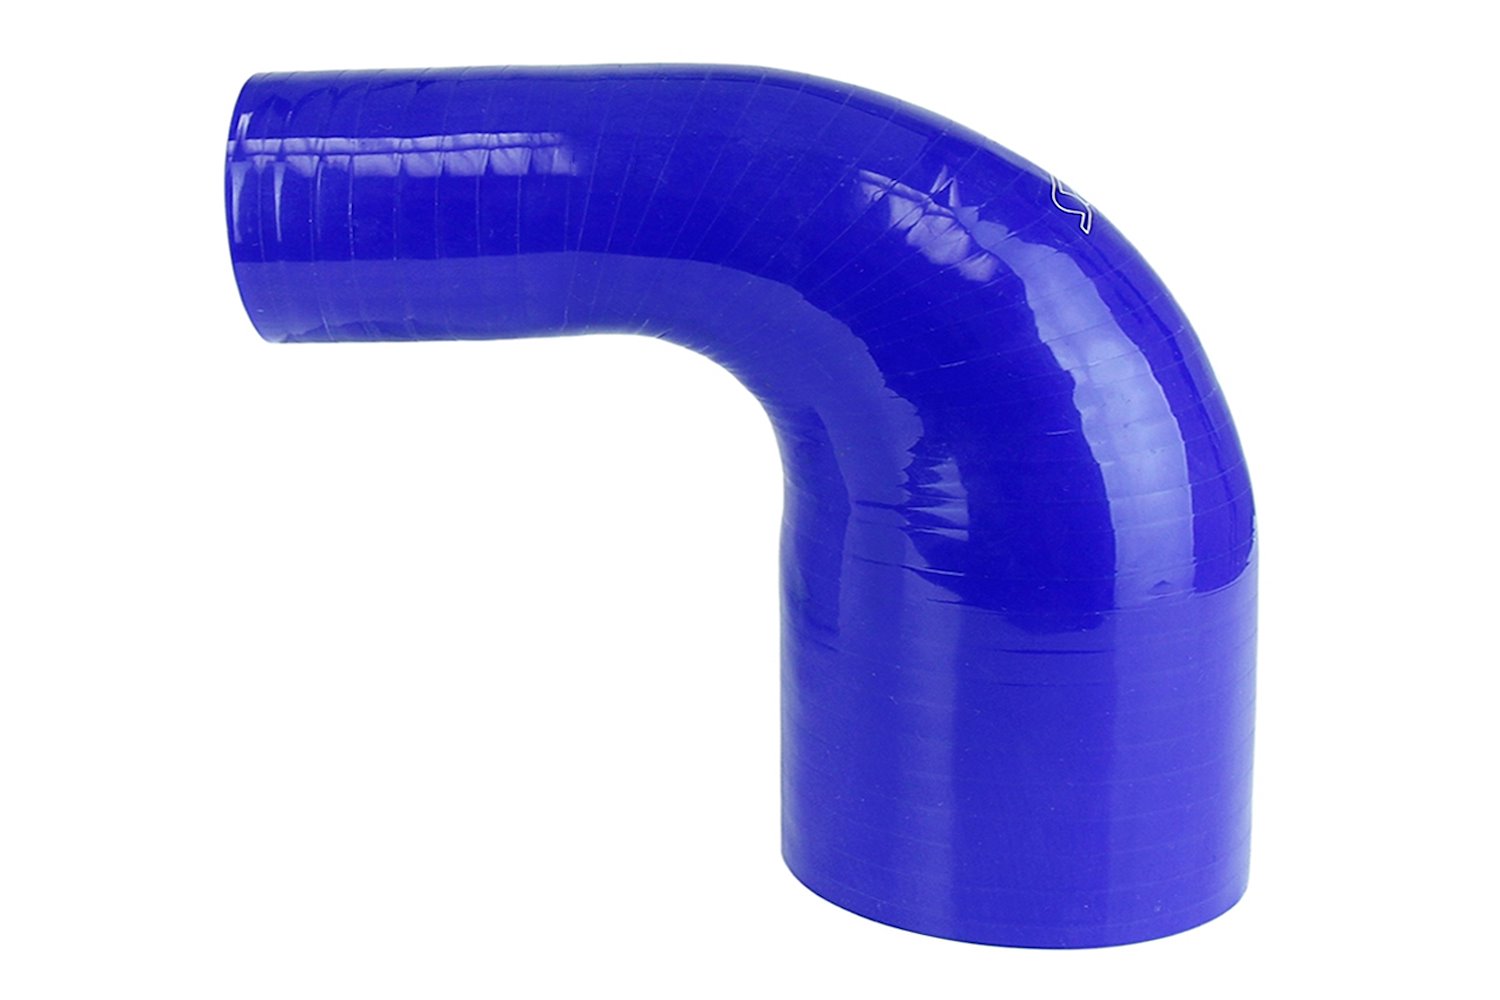 HTSER90-250-400-BLUE Silicone 90-Degree Elbow Hose, High-Temp 4-Ply Reinforced, 2-1/2 in. - 4 in. ID, Blue